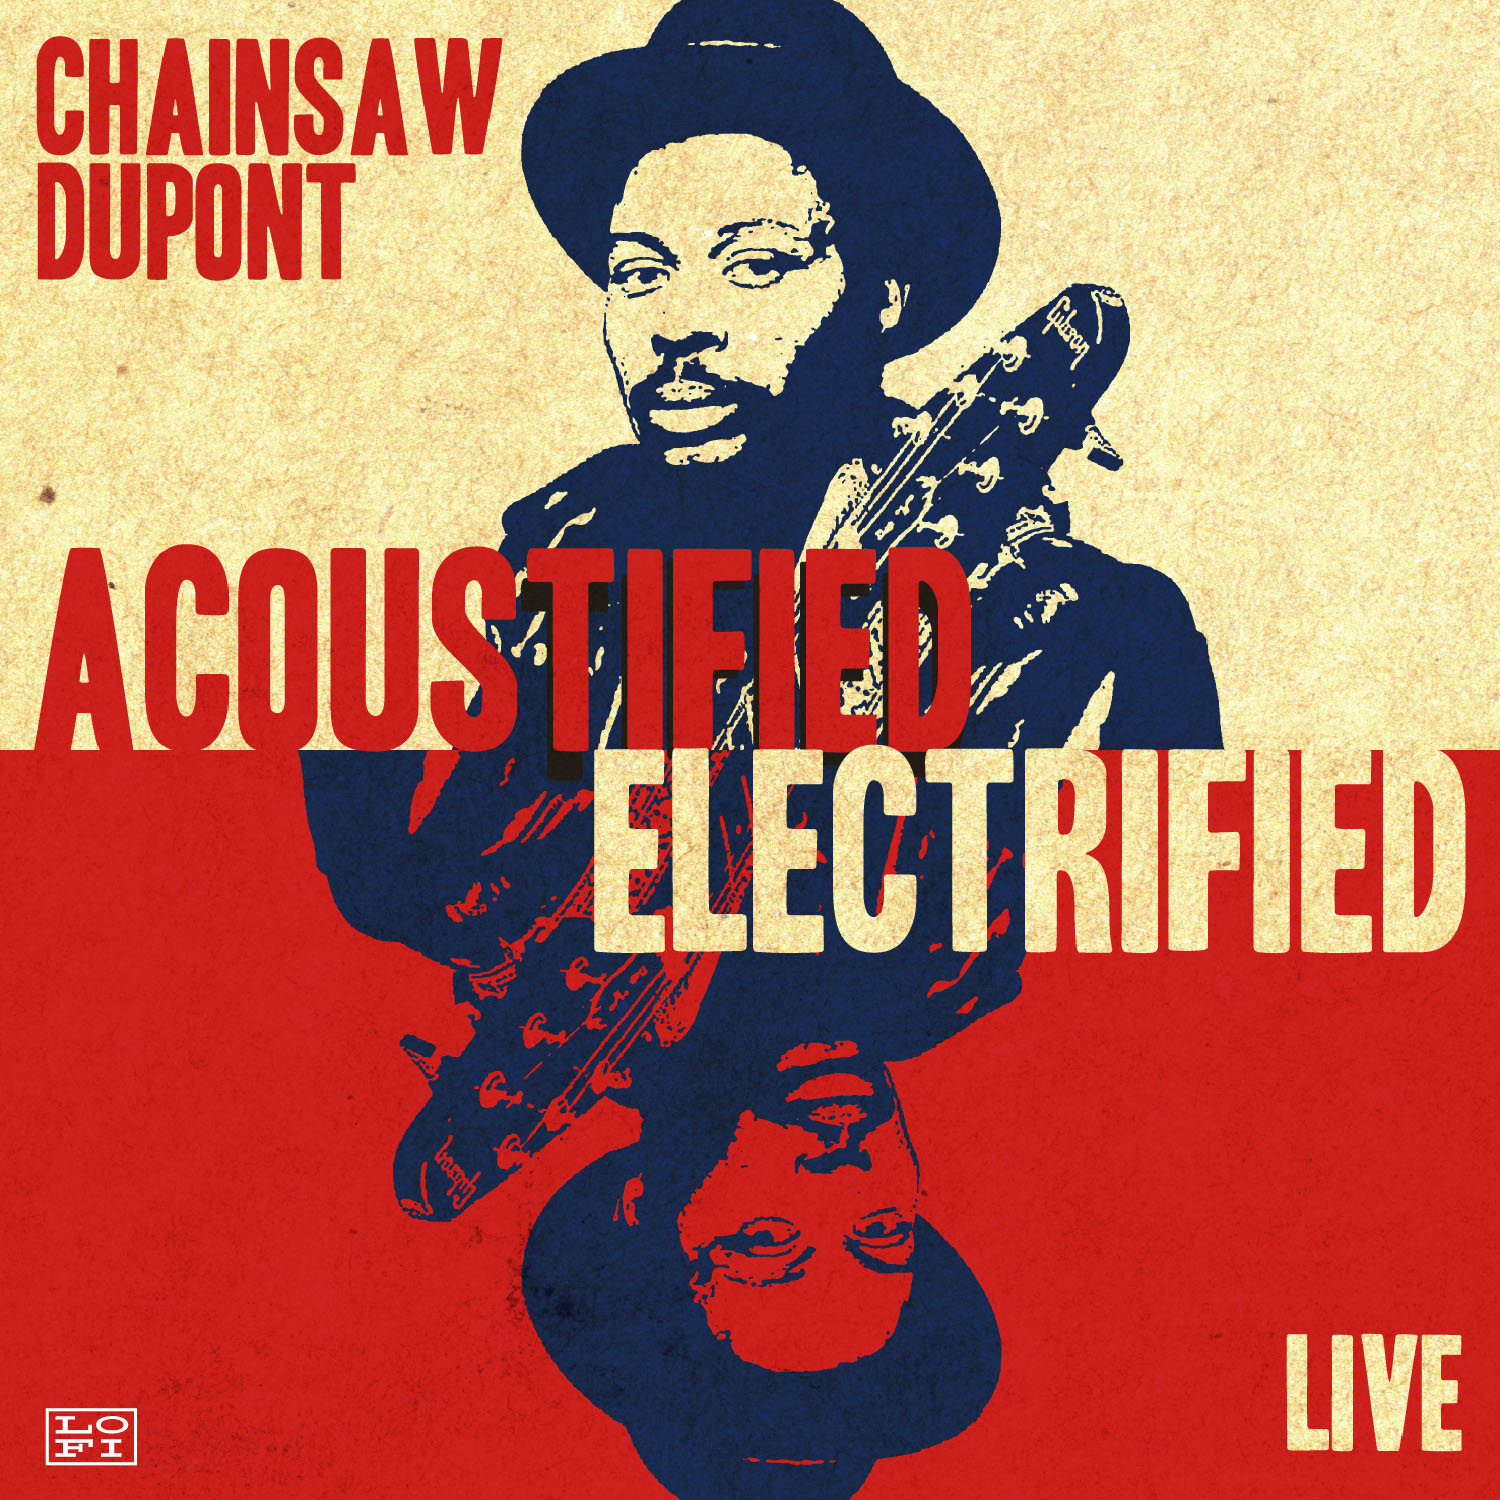 1-sheets: “Acoustified / Electrified”, Chainsaw Dupont